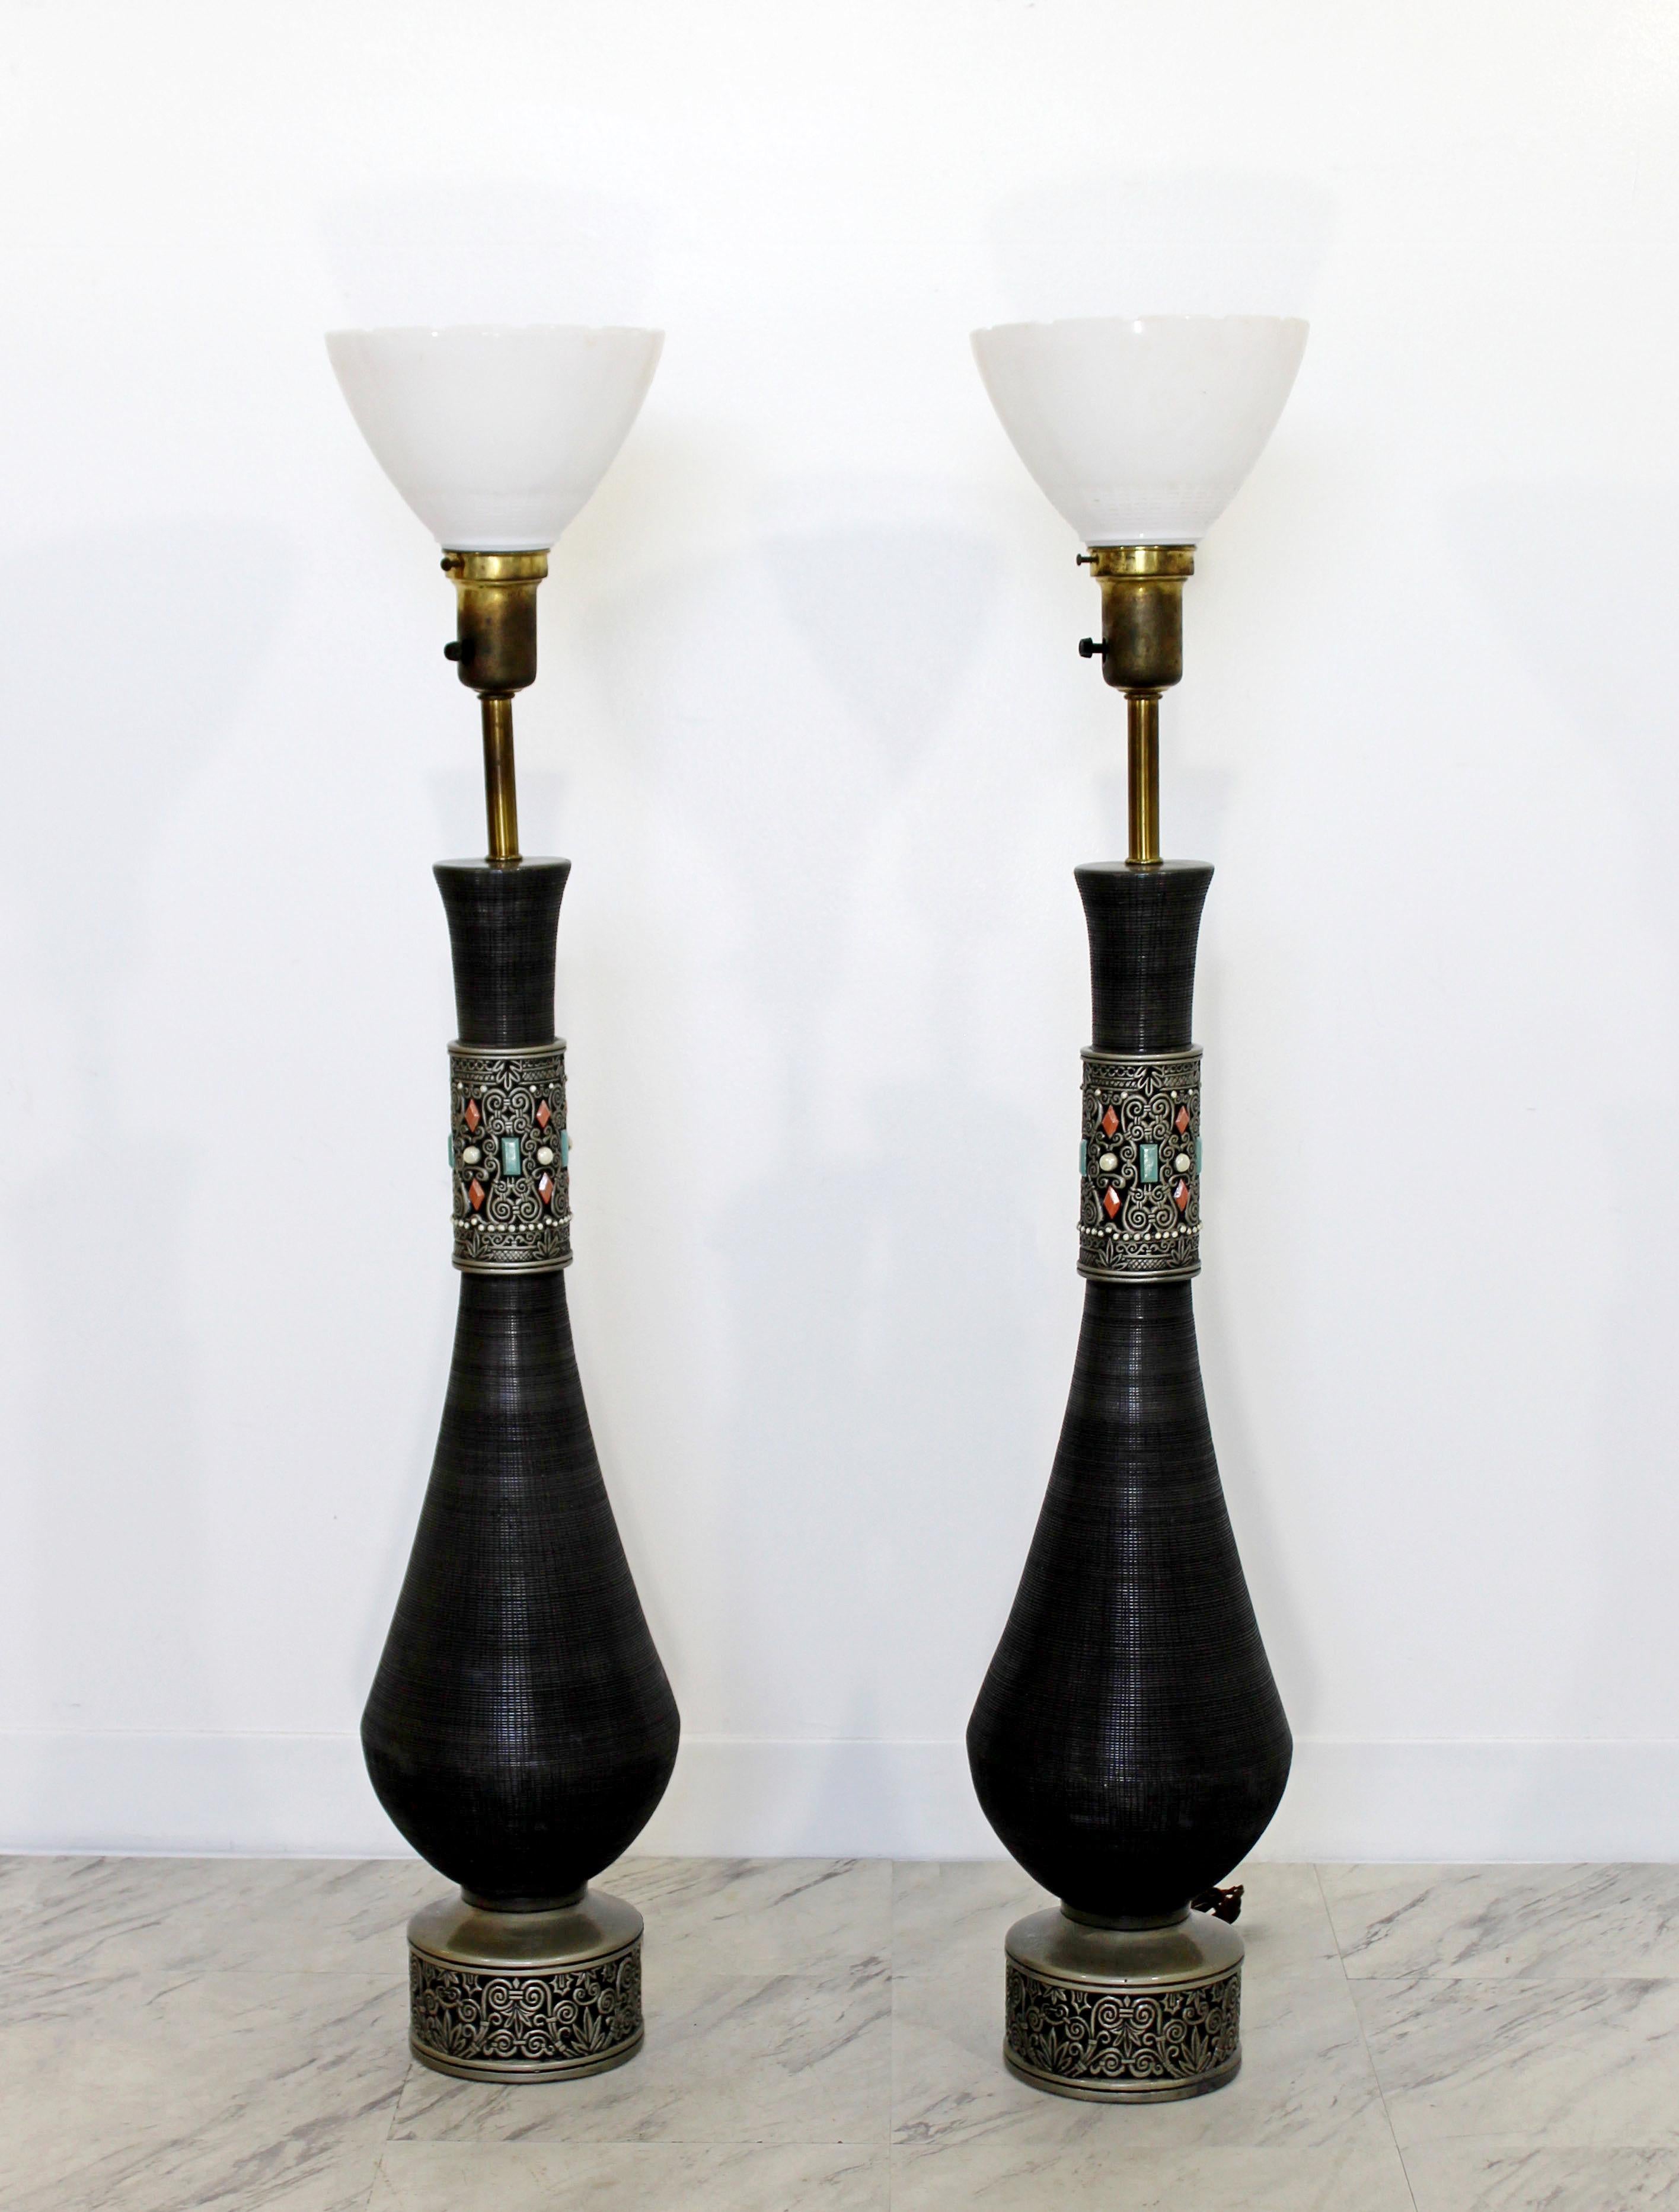 American Mid-Century Modern Pair of Tall Ceramic Table Lamps by Firenze Reglor California